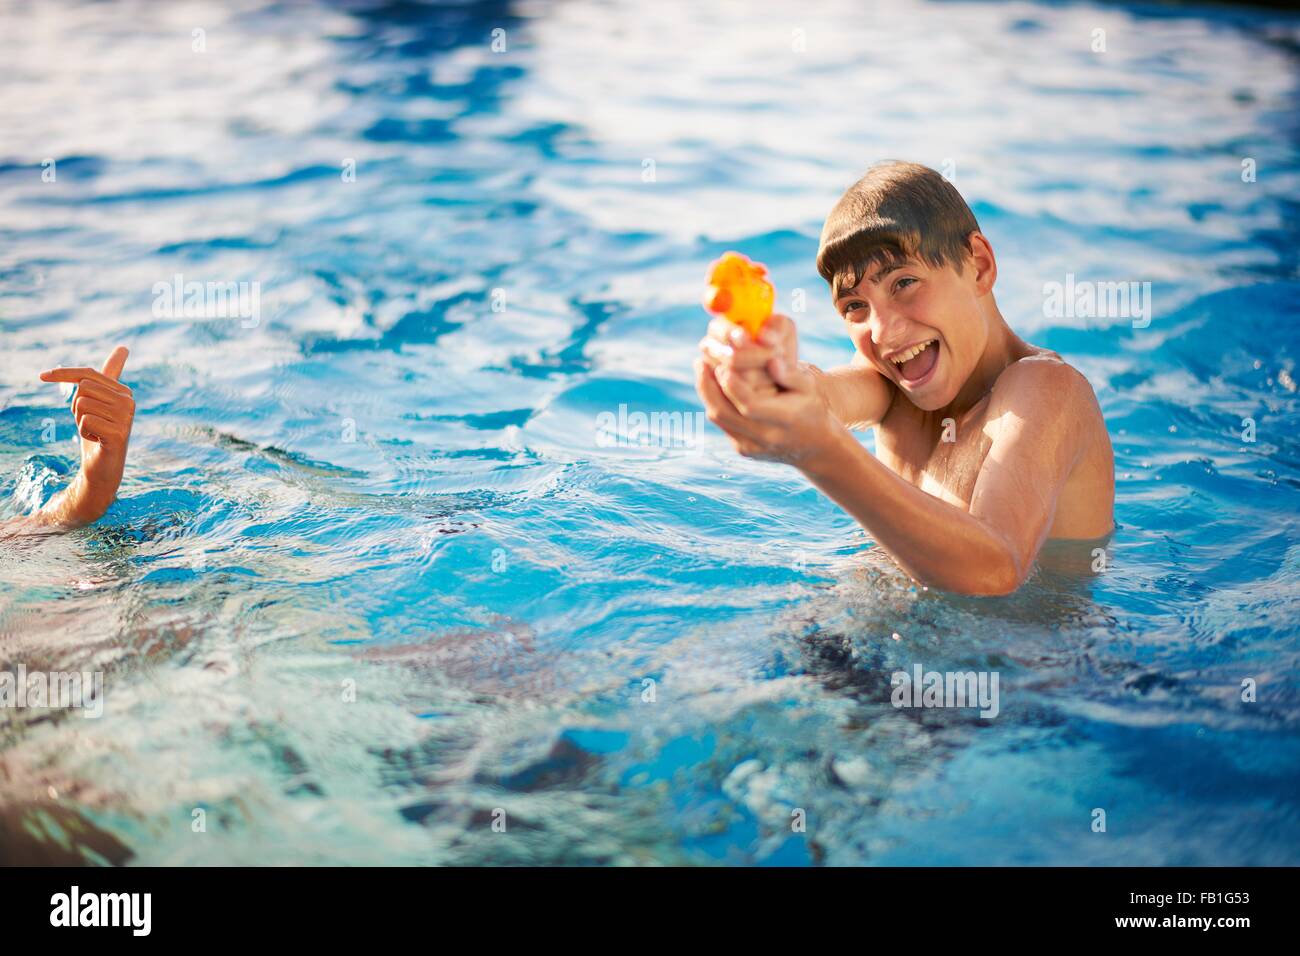 Boy squirting water pistol in outdoor swimming pool Stock Photo